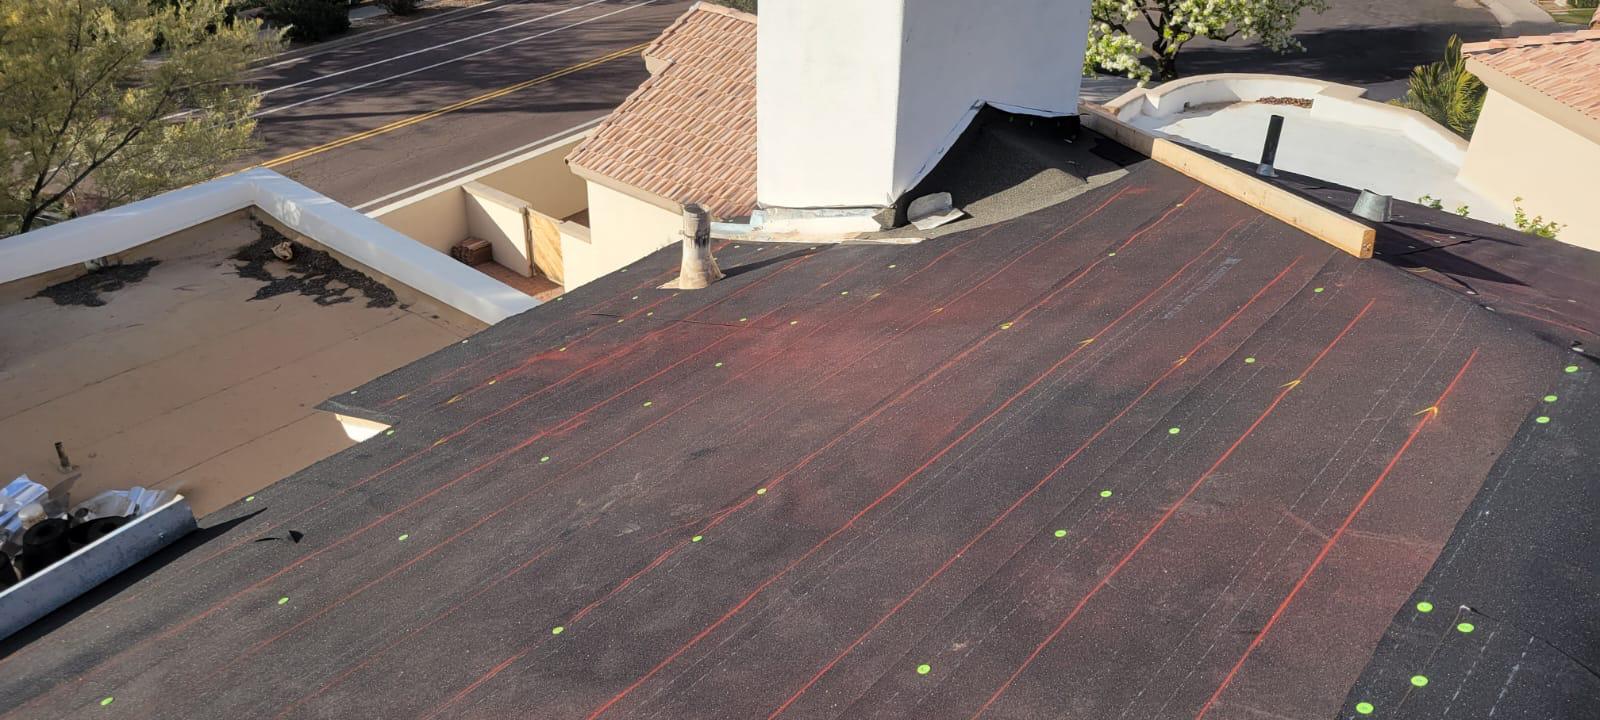 Precision underlayment by Behmer Roofing sets the stage for durable tile re-felting in Estancia.